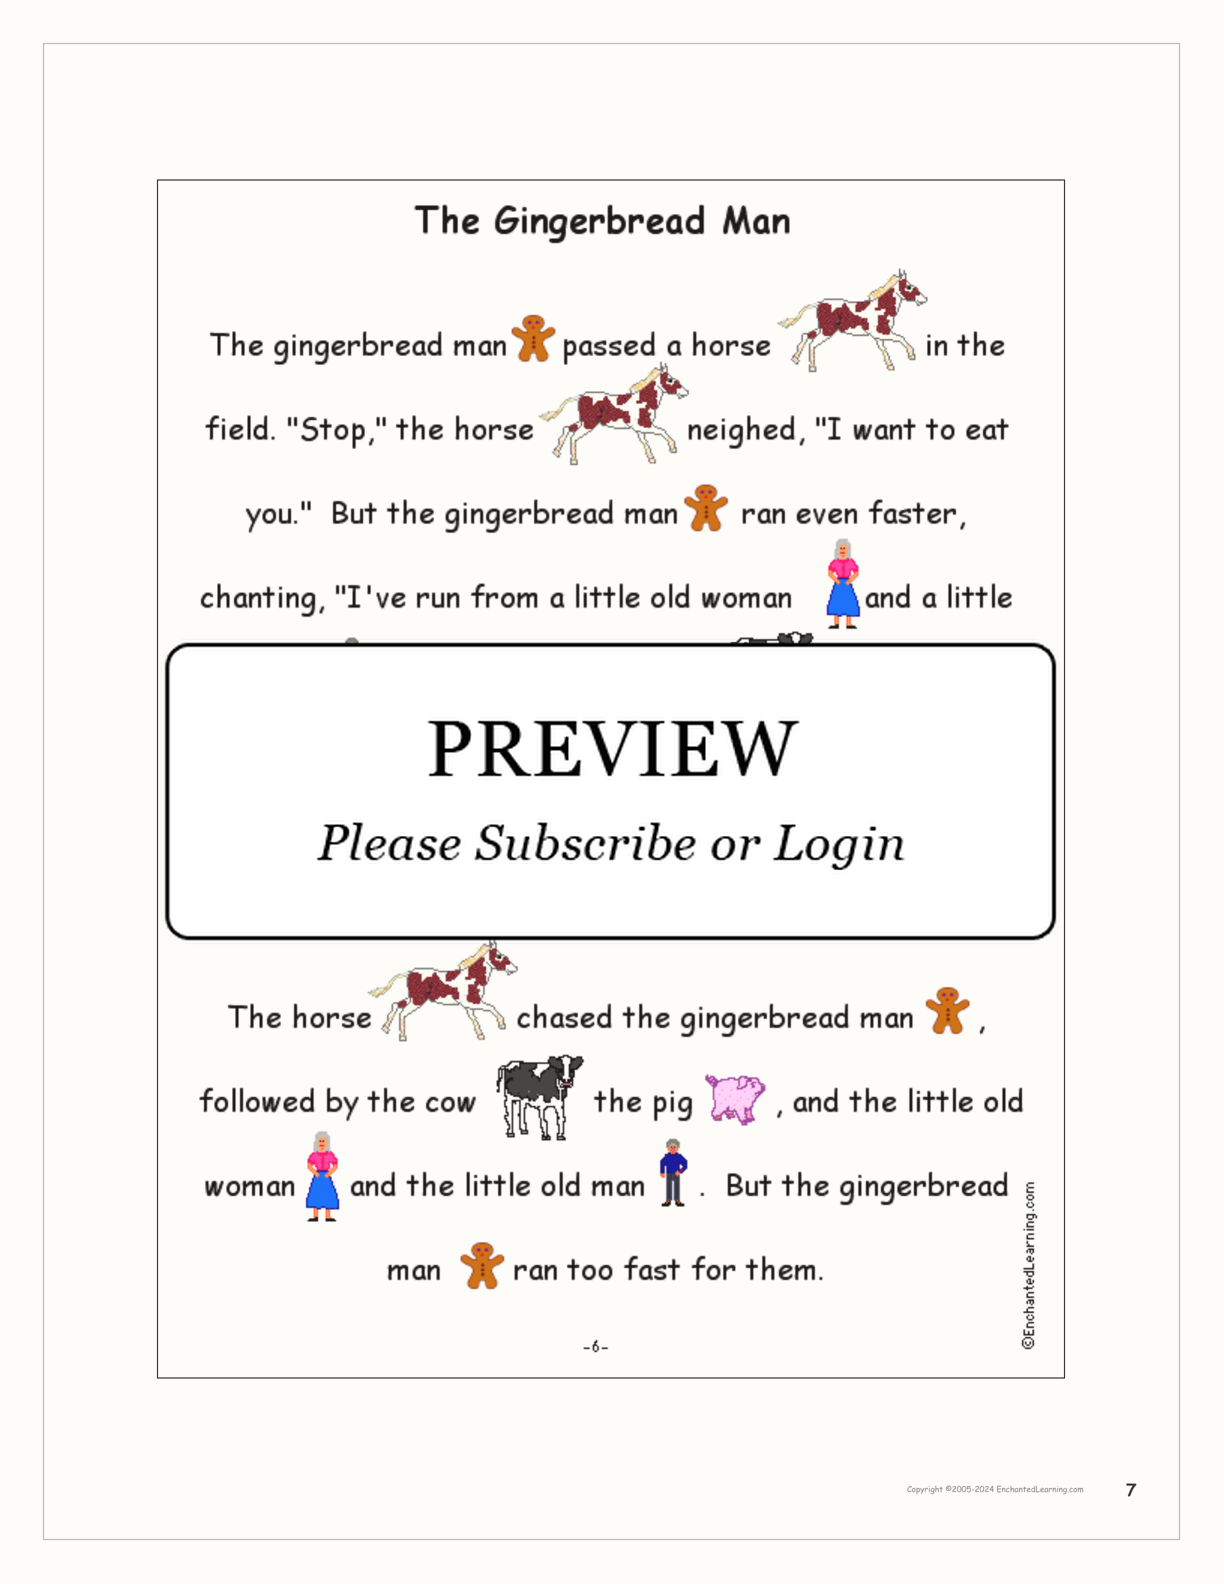 'The Gingerbread Man' Book interactive printout page 7